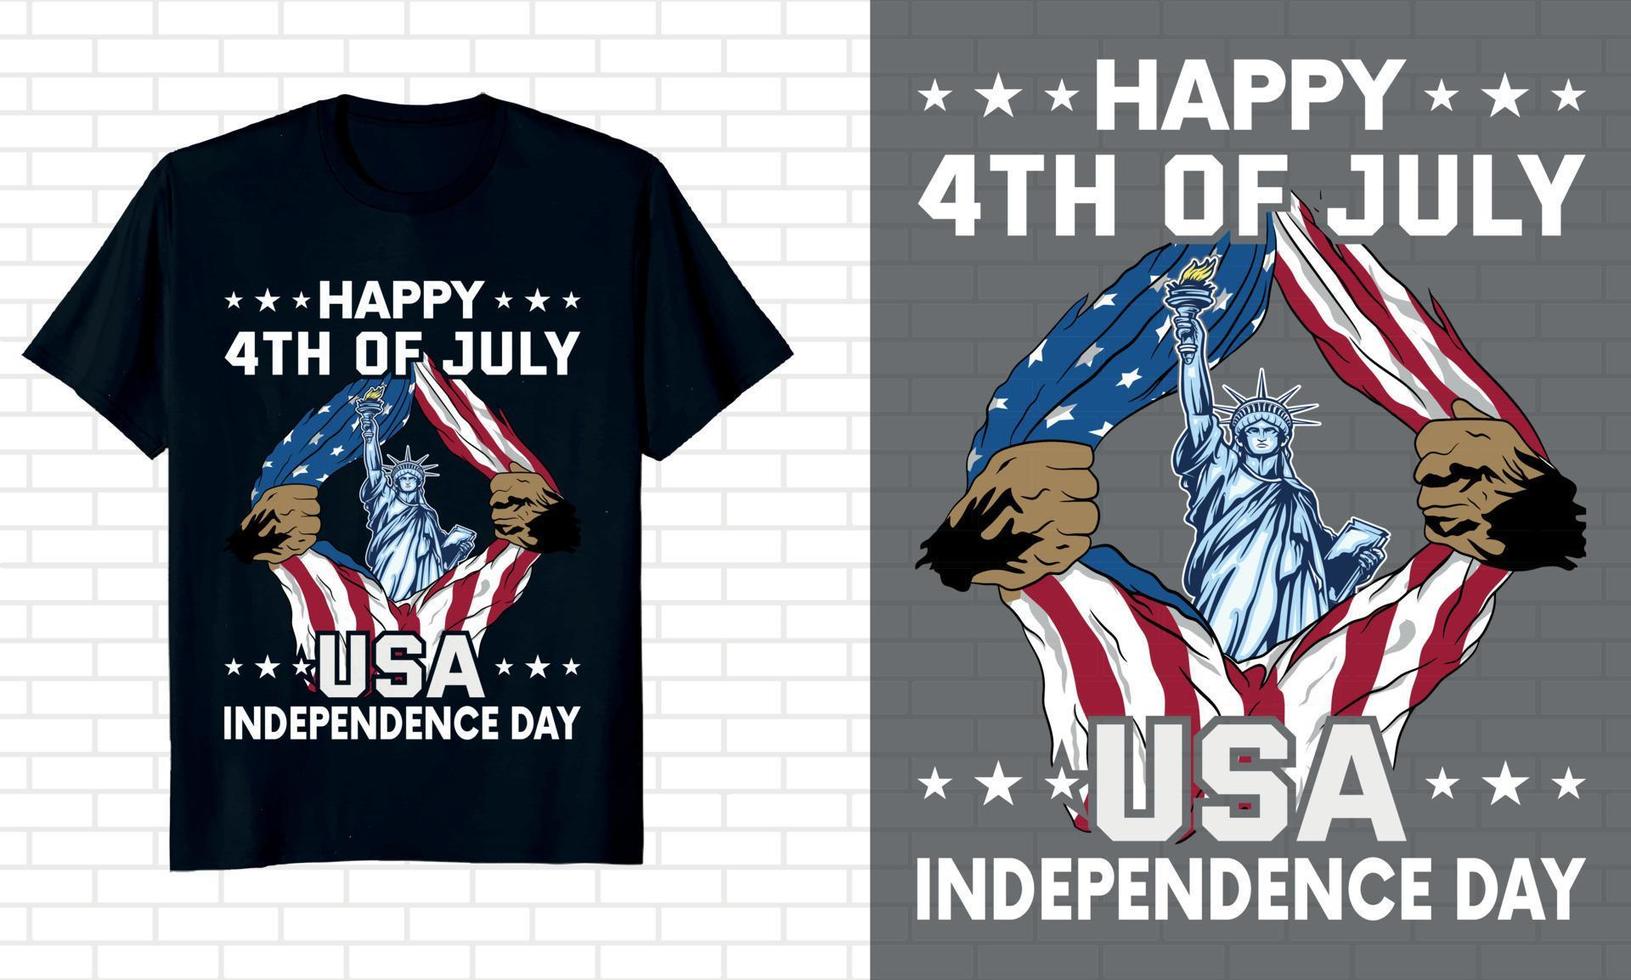 felice 4 luglio t-shirt design usa Independence Day vettore